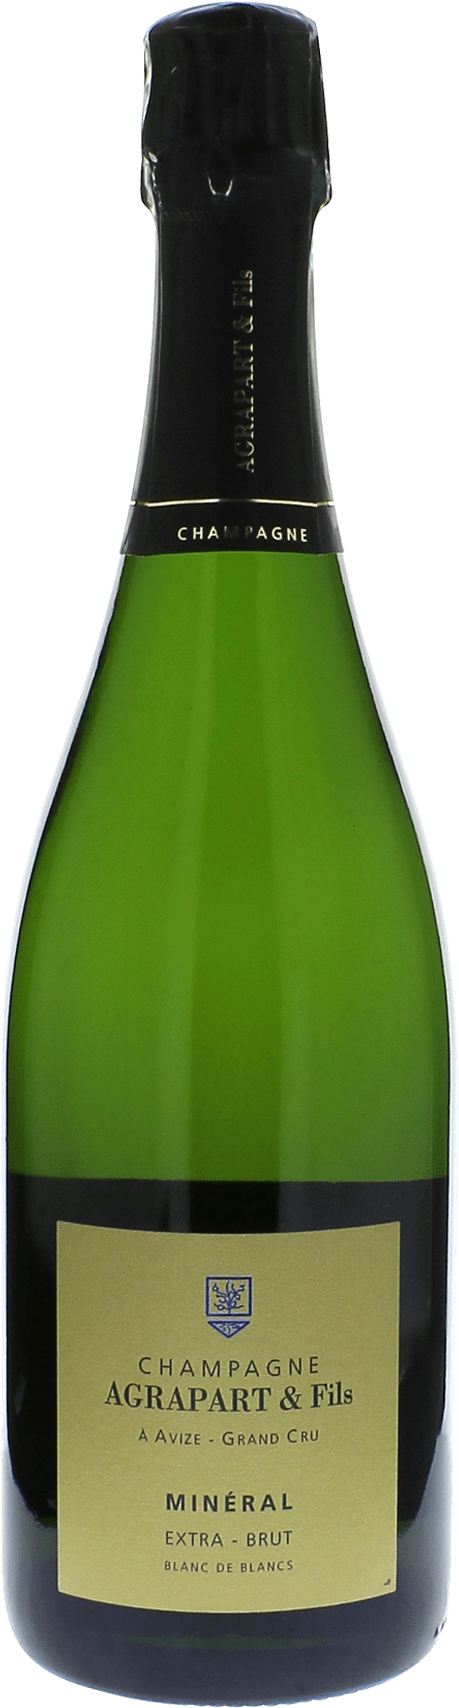 Agrapart  mineral extra brut blanc de blancs 2010  Agrapart & Fils, Champagne